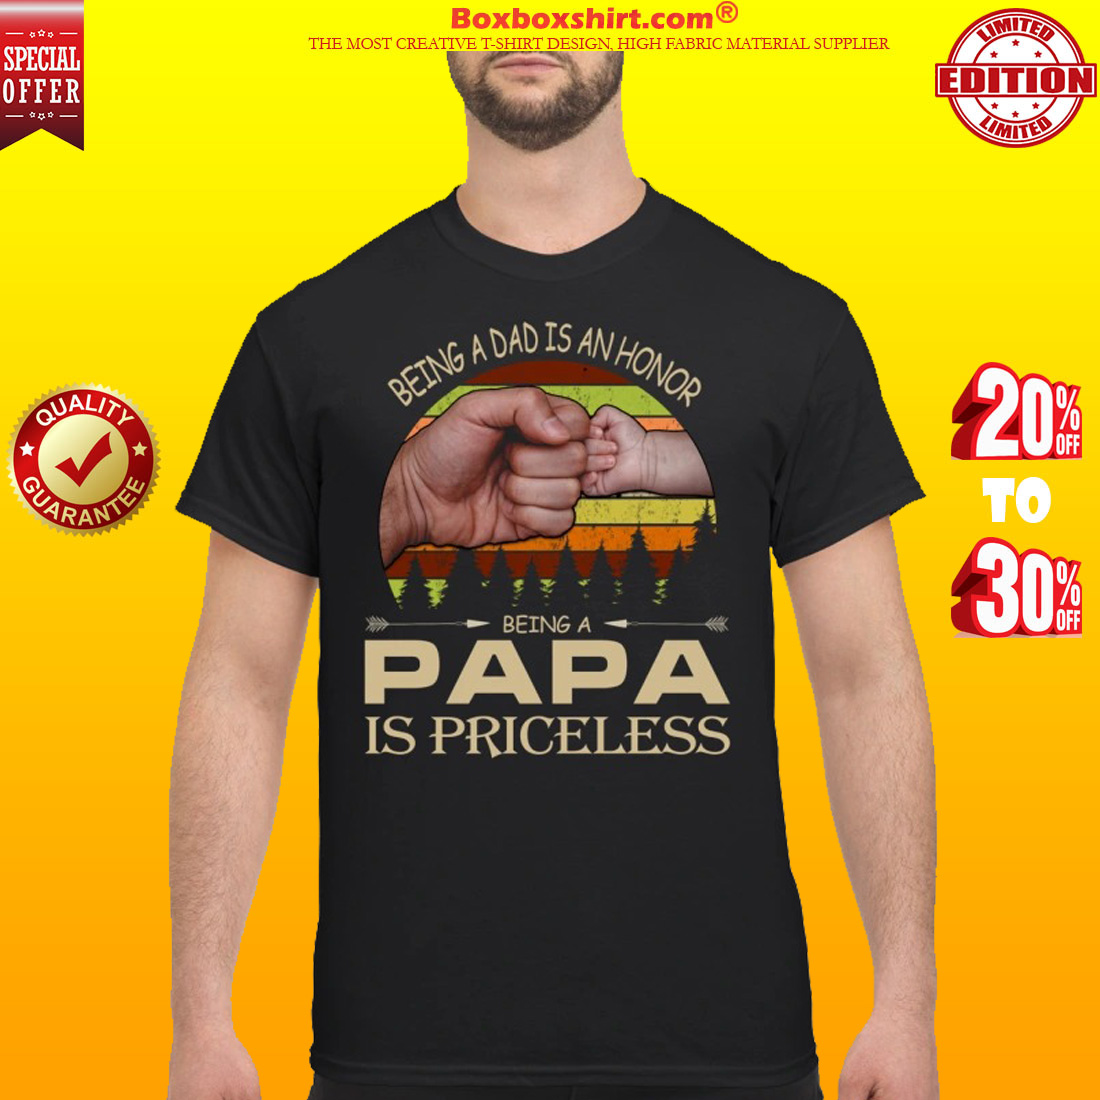 Being a dad is an honor being a papa is priceless shirt